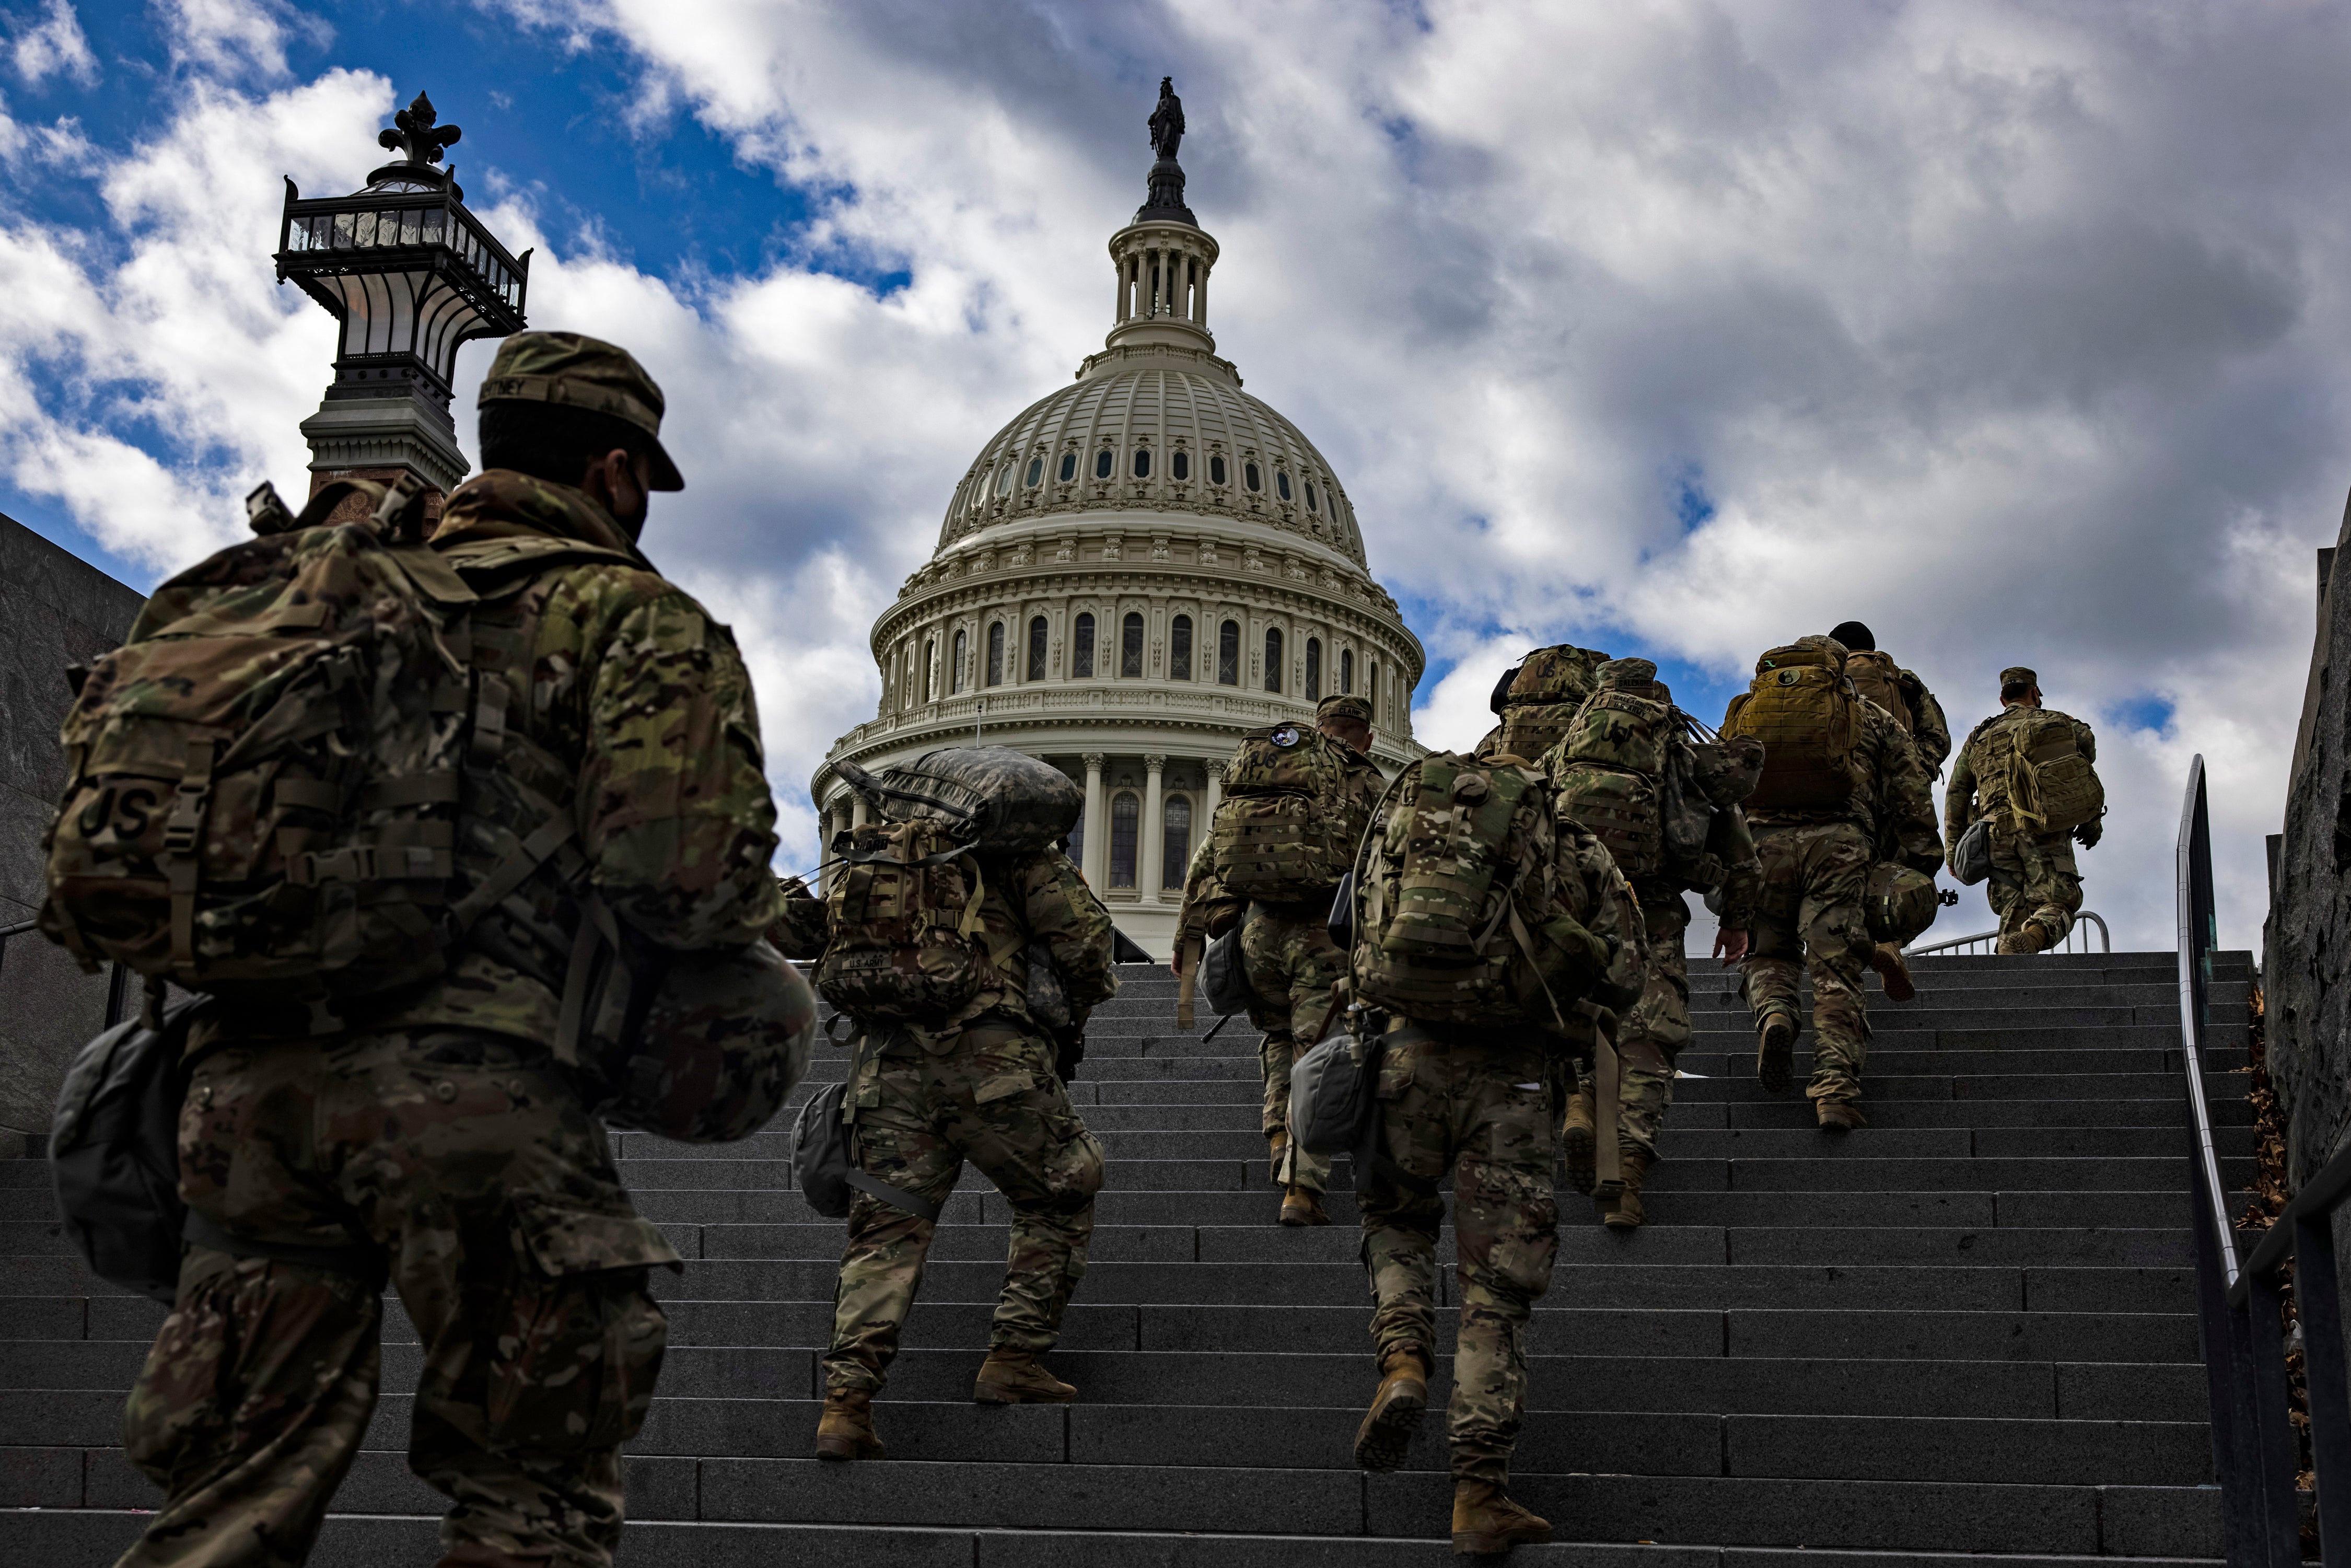 WASHINGTON, DC - JANUARY 17: National Guard soldier head to the east front of the U.S. Capitol from the Capitol Visitors Center on January 17, 2021 in Washington, DC. After last week's riots at the U.S. Capitol Building, the FBI has warned of additional threats in the nation's capital and in all 50 states. According to reports, as many as 25,000 National Guard soldiers will be guarding the city as preparations are made for the inauguration of Joe Biden as the 46th U.S. President. (Photo by Samuel Corum/Getty Images)